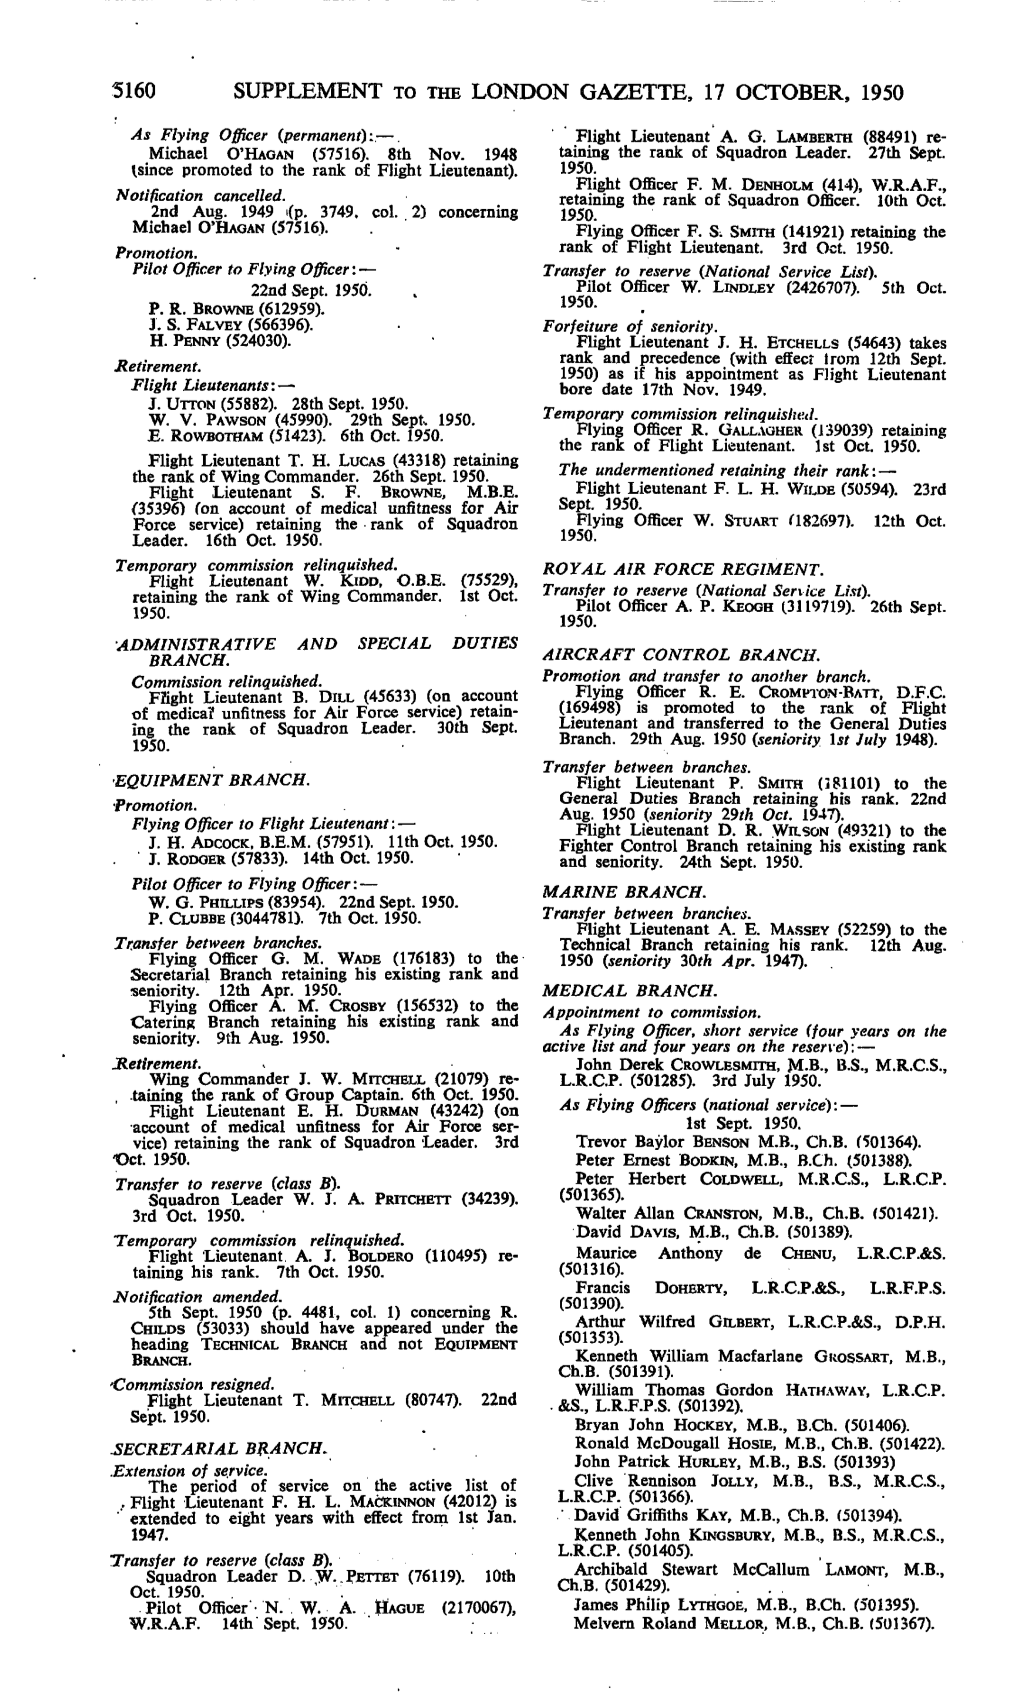 5160 Supplement to the London Gazette, 17 October, 1950